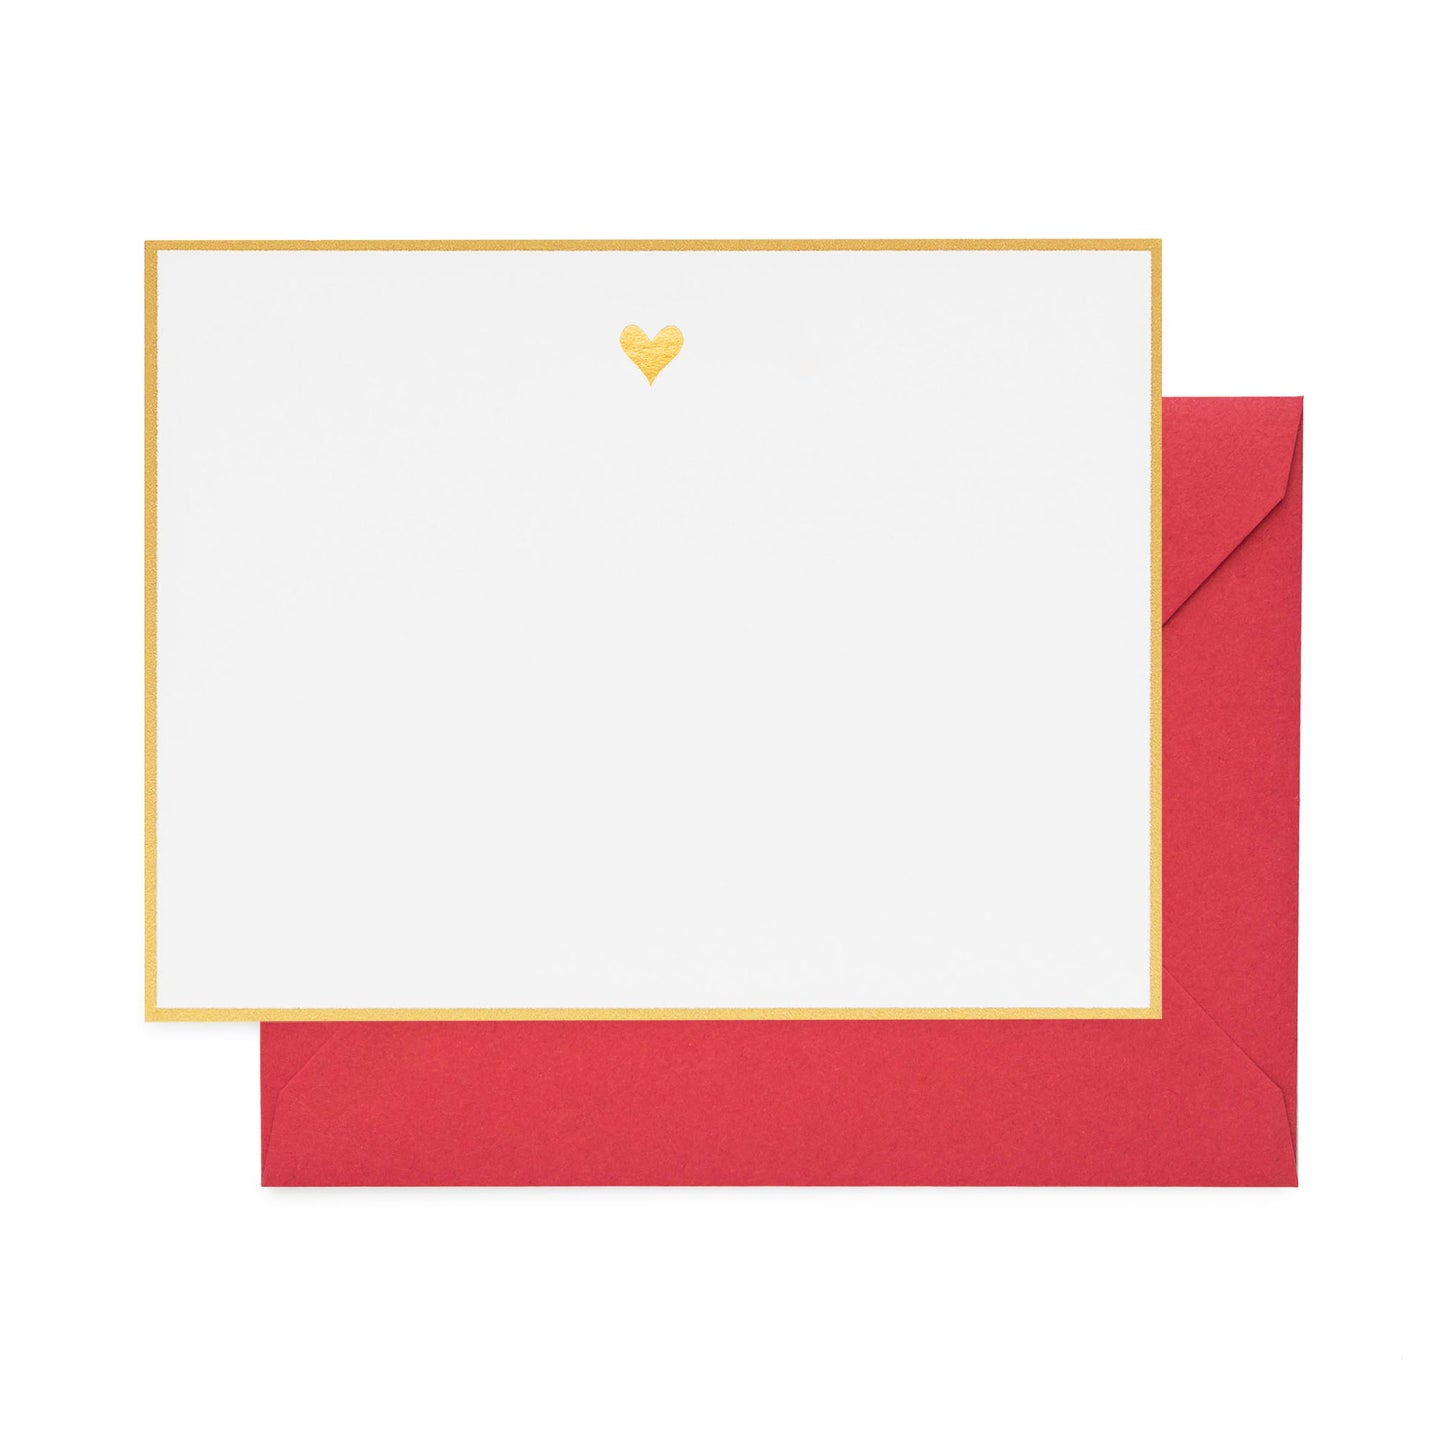 white card with gold border and gold heart, red envelope